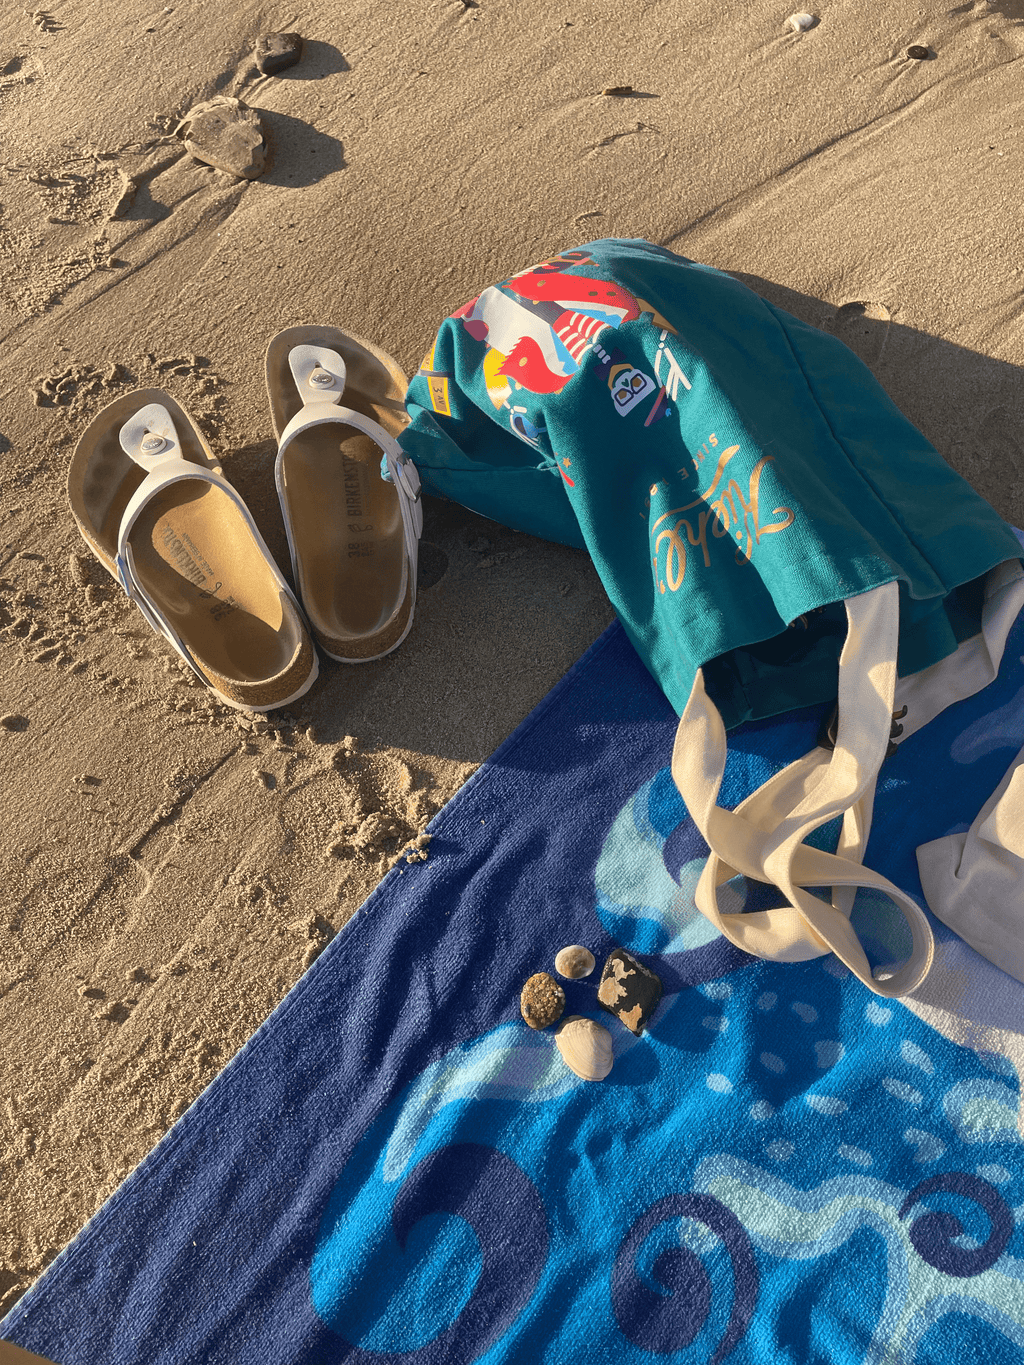 Layout of beach tote with Birkenstock sandals and collected rocks.